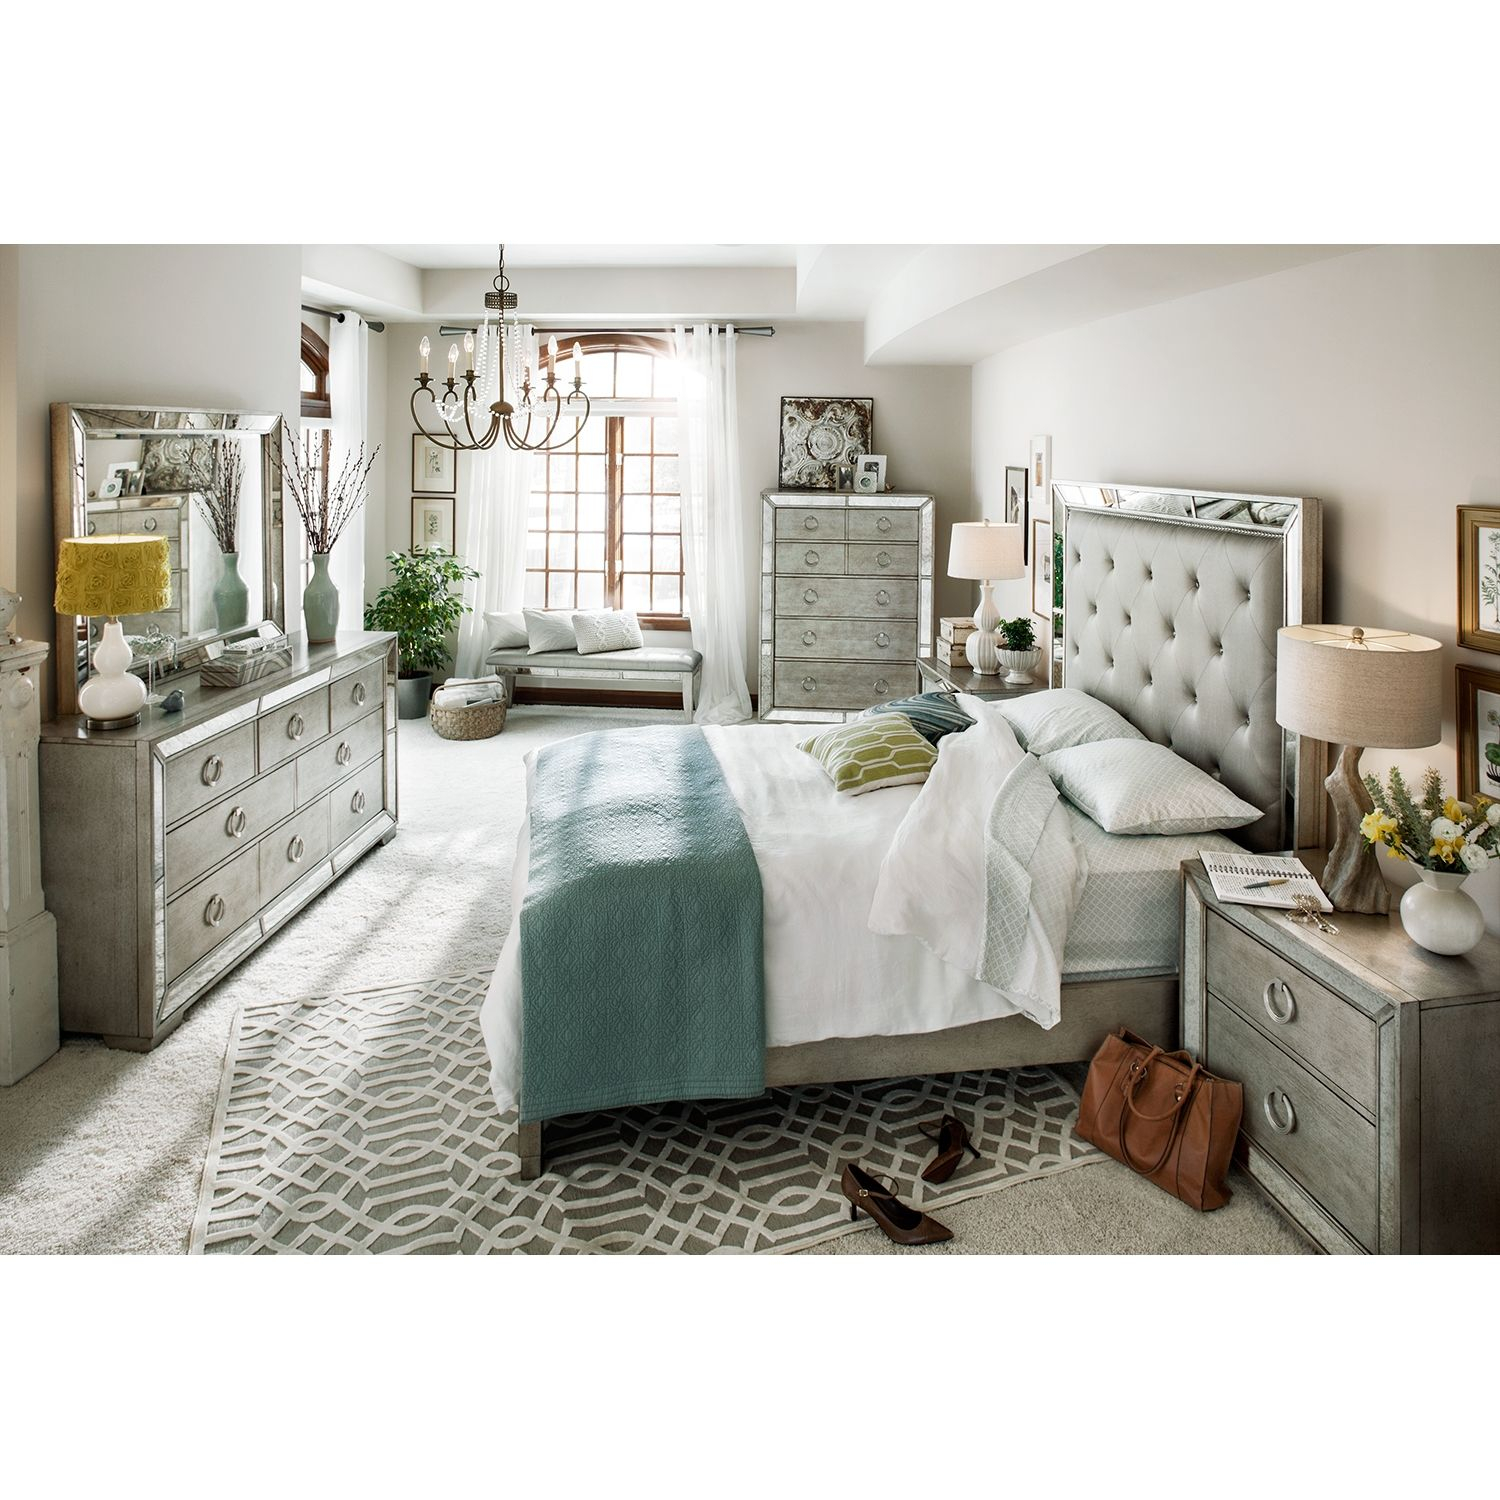 Angelina Upholstered Bed Glam Upholstered Bedroom Set Bedroom within dimensions 1500 X 1500